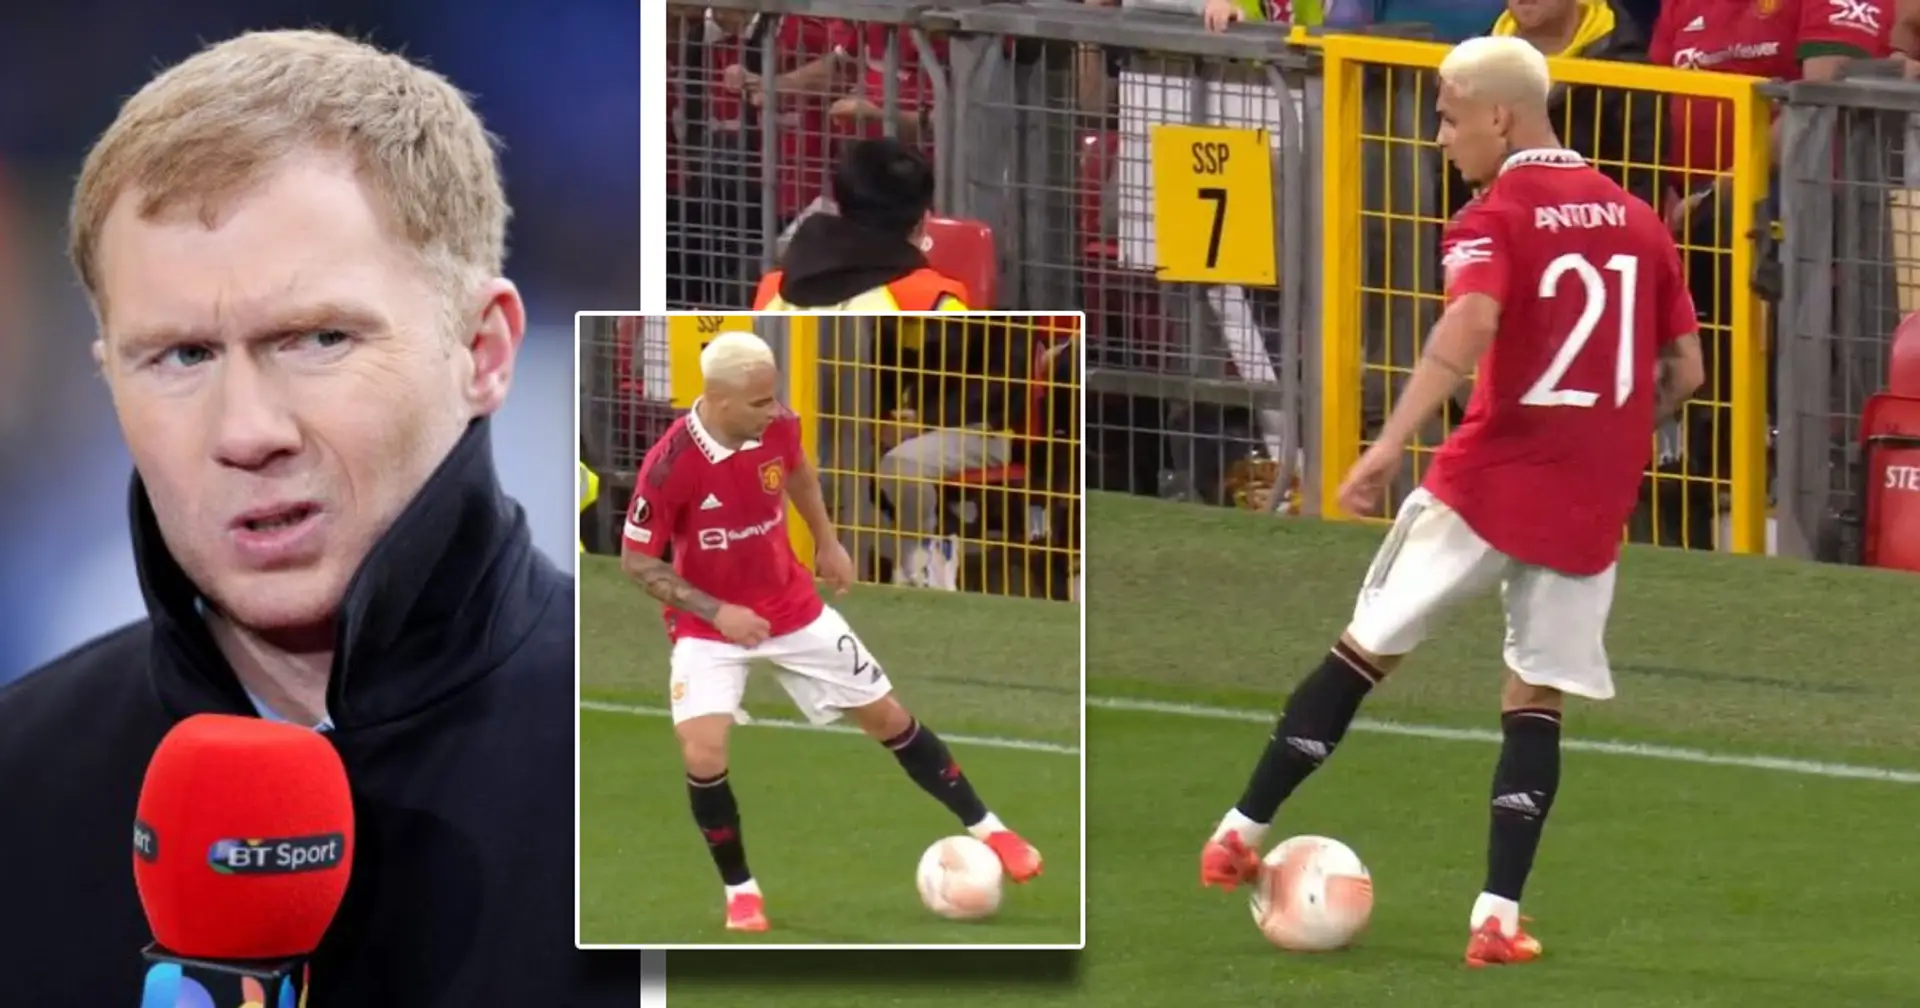 'This country doesn't like to see that': Paul Scholes brands Antony 'clown' for showboating vs Sheriff